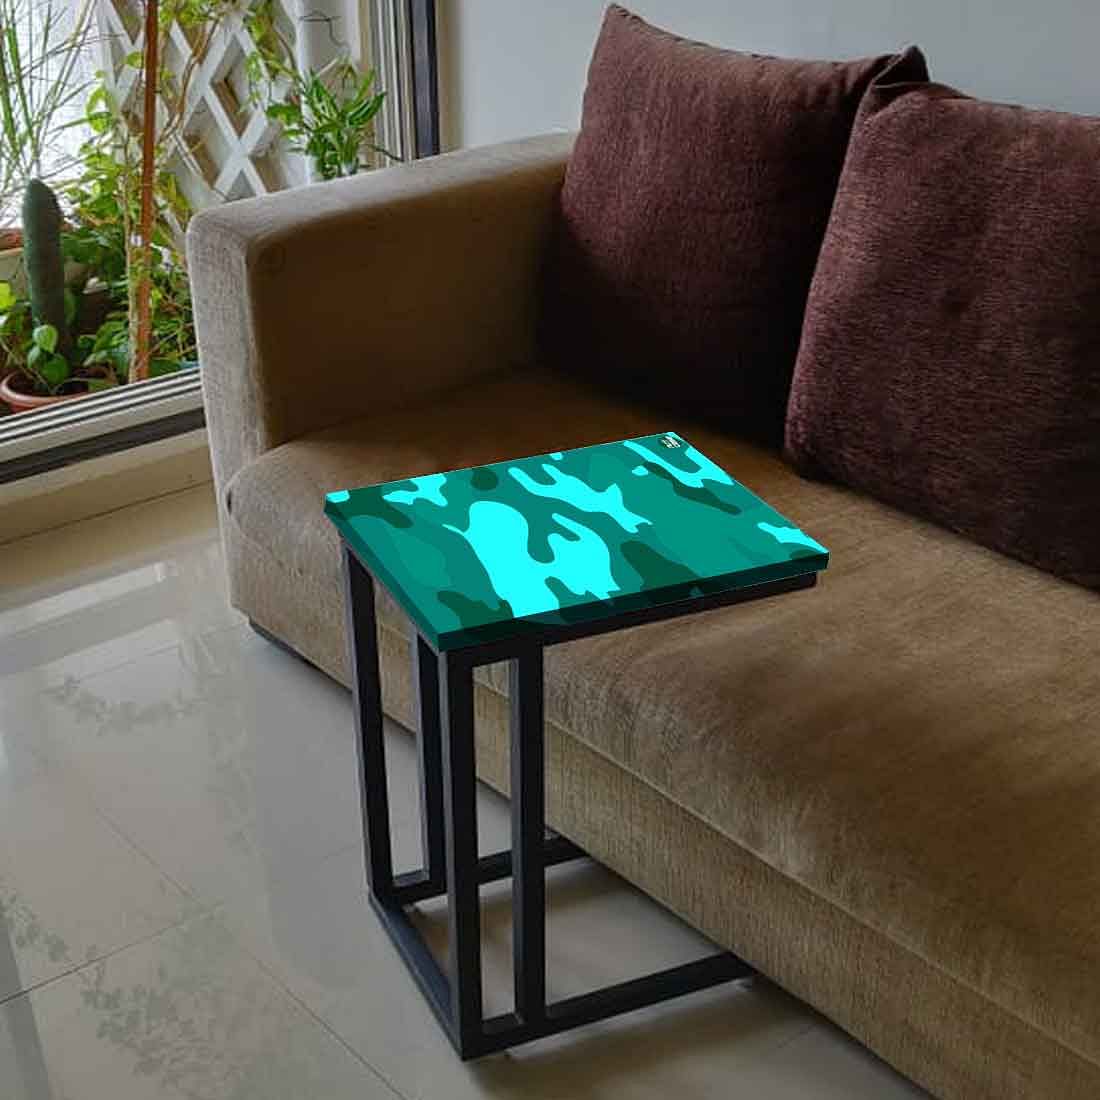 Outdoor C Shaped Table - Army Camouflage Green Nutcase